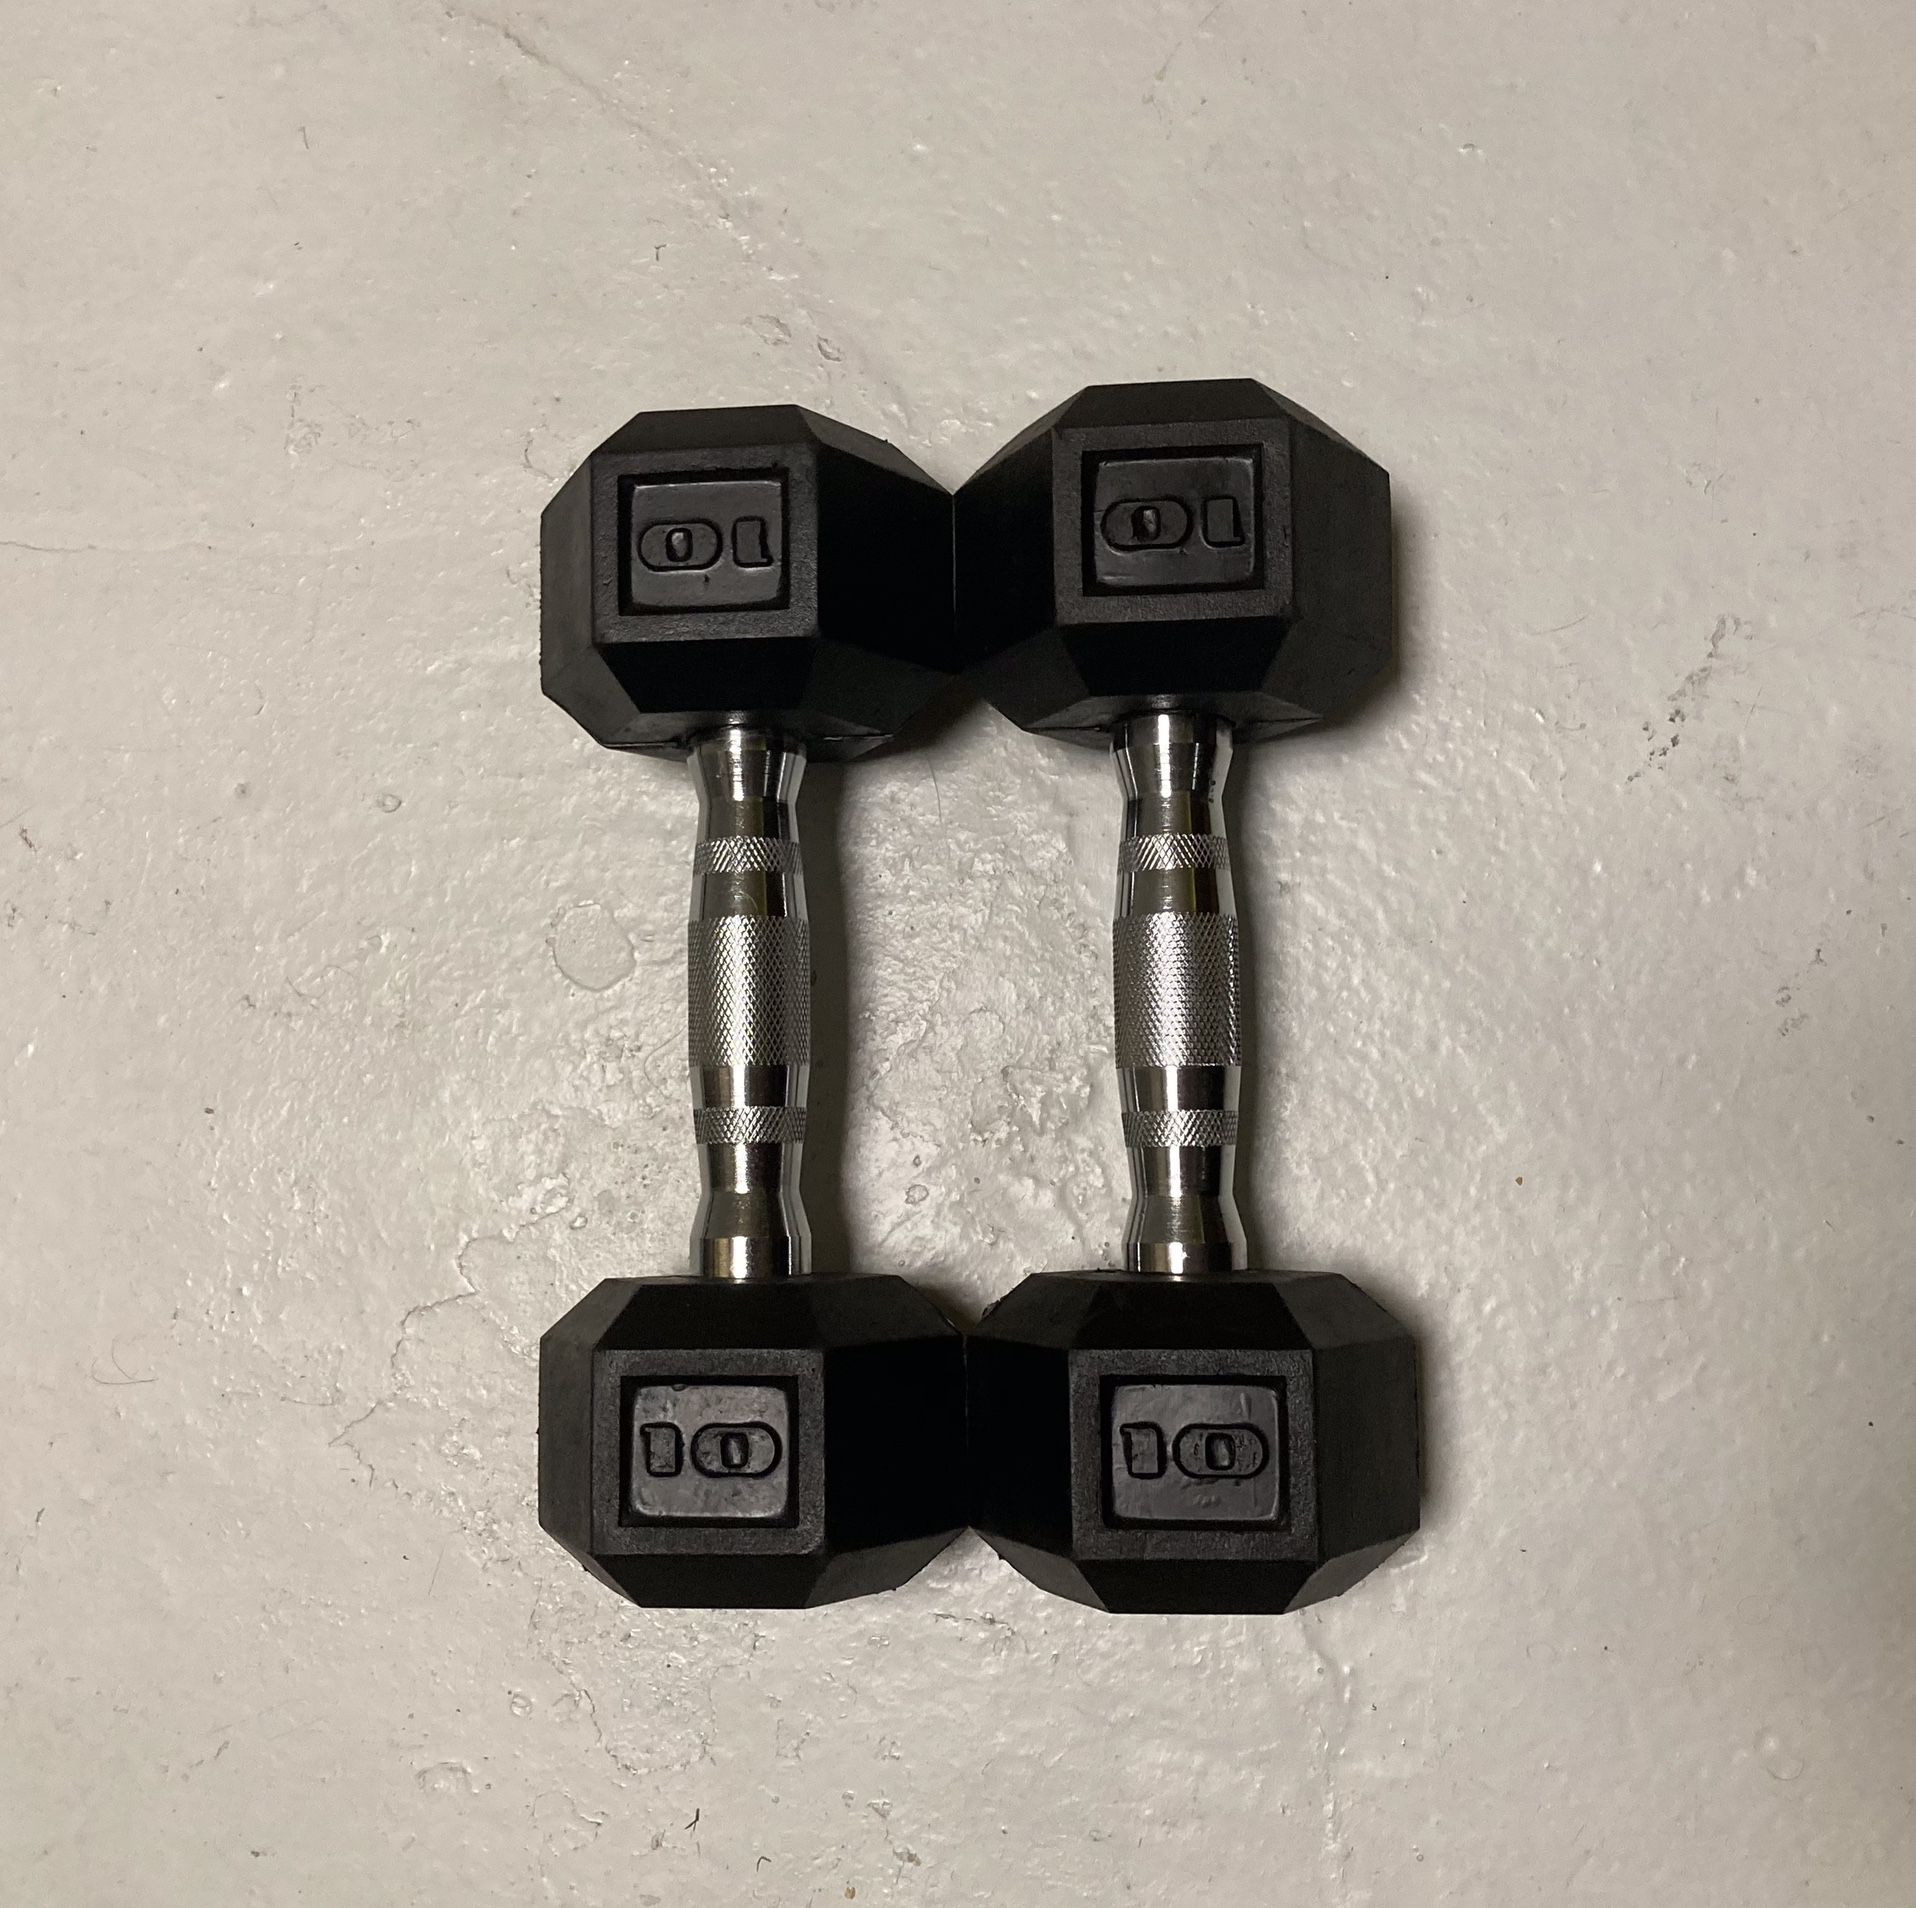 10 lb dumbbells dumbbell set x2 20 lbs total Rubber Hex weights weight pair pounds pound 10lb 10lbs 20lb 20lbs like new